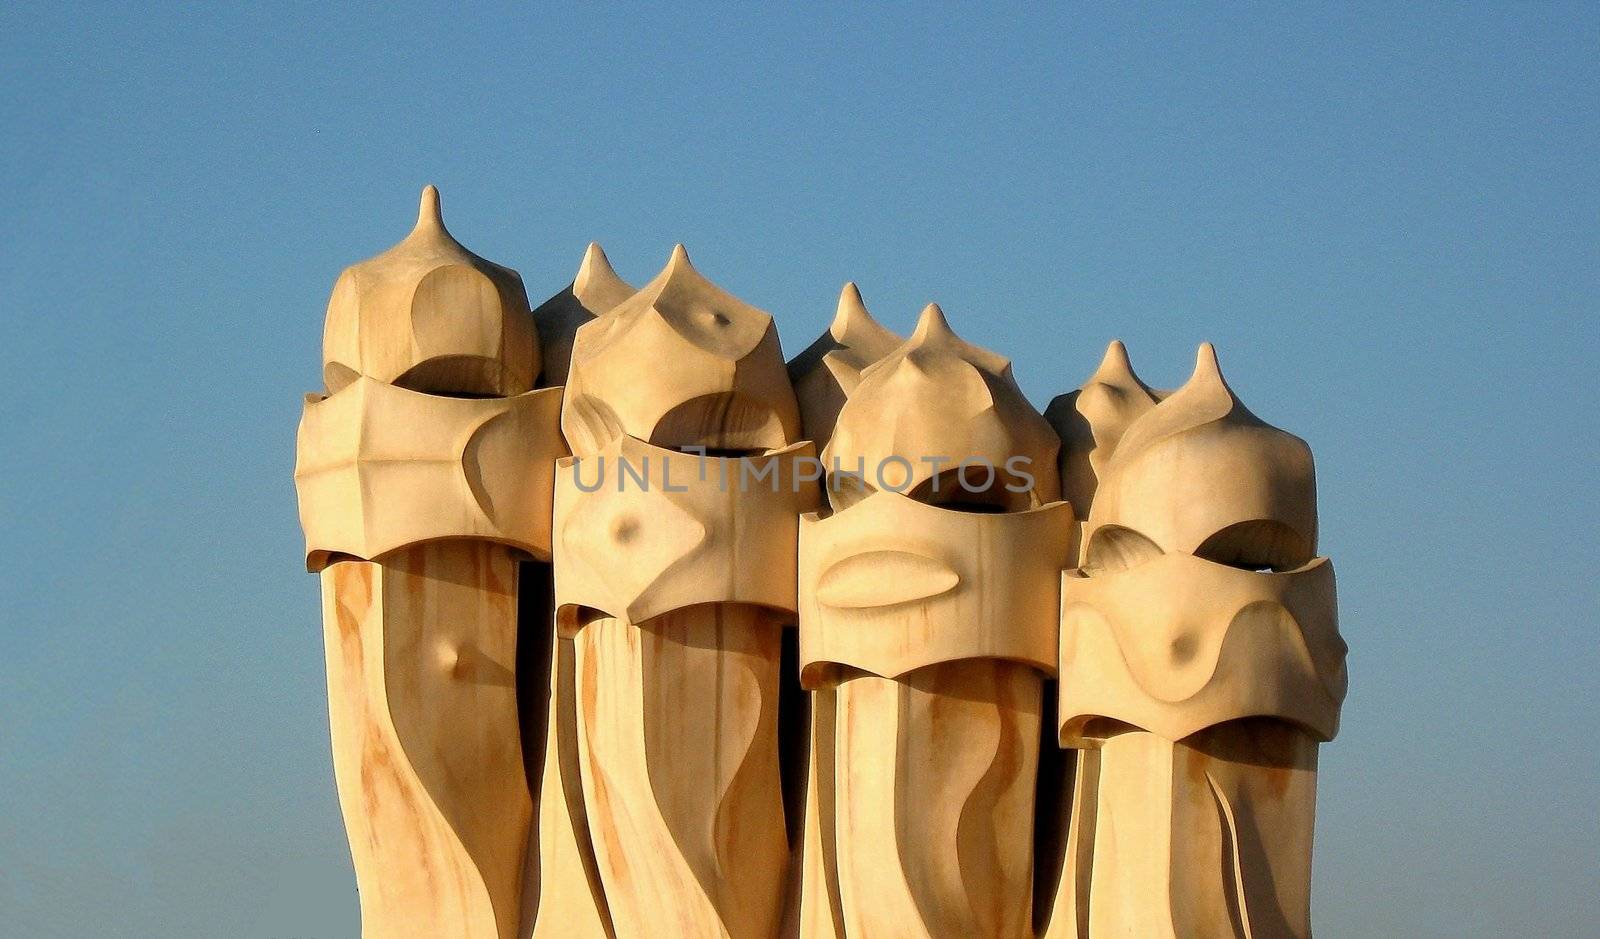 Details of chimneys created by Gaudi in Barcelona